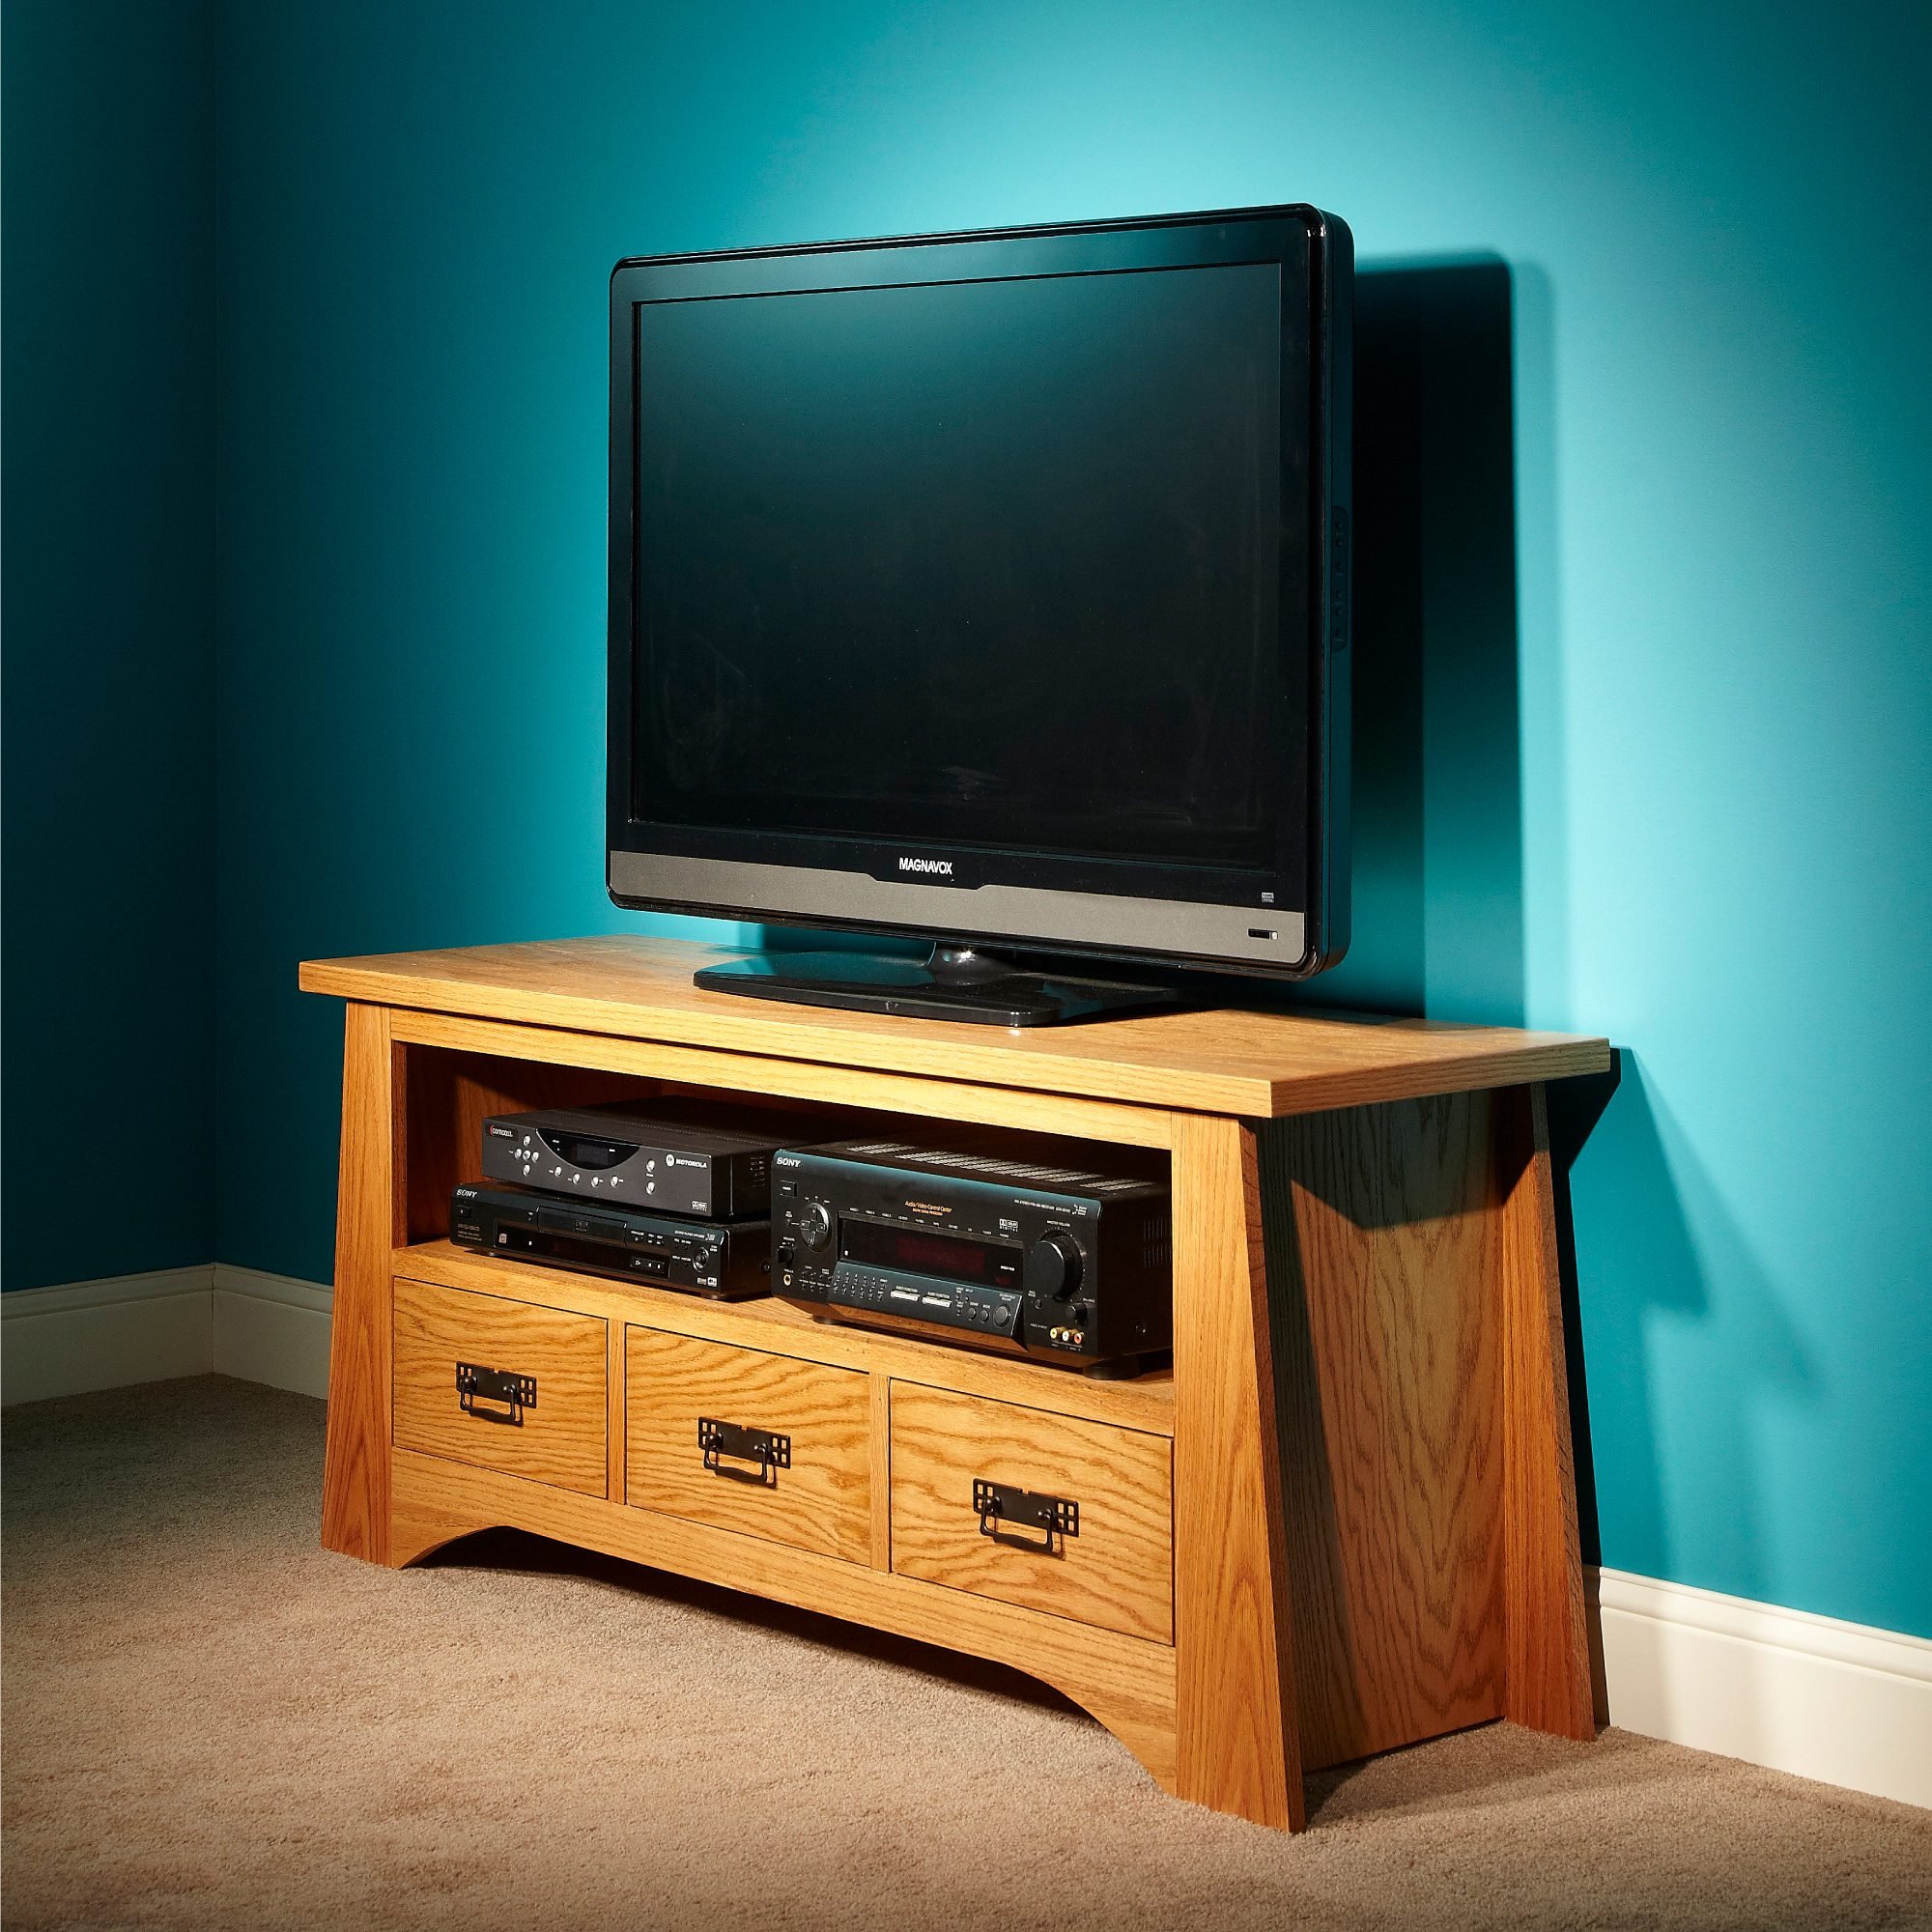 How To Build A Do It Yourself Tv Stand